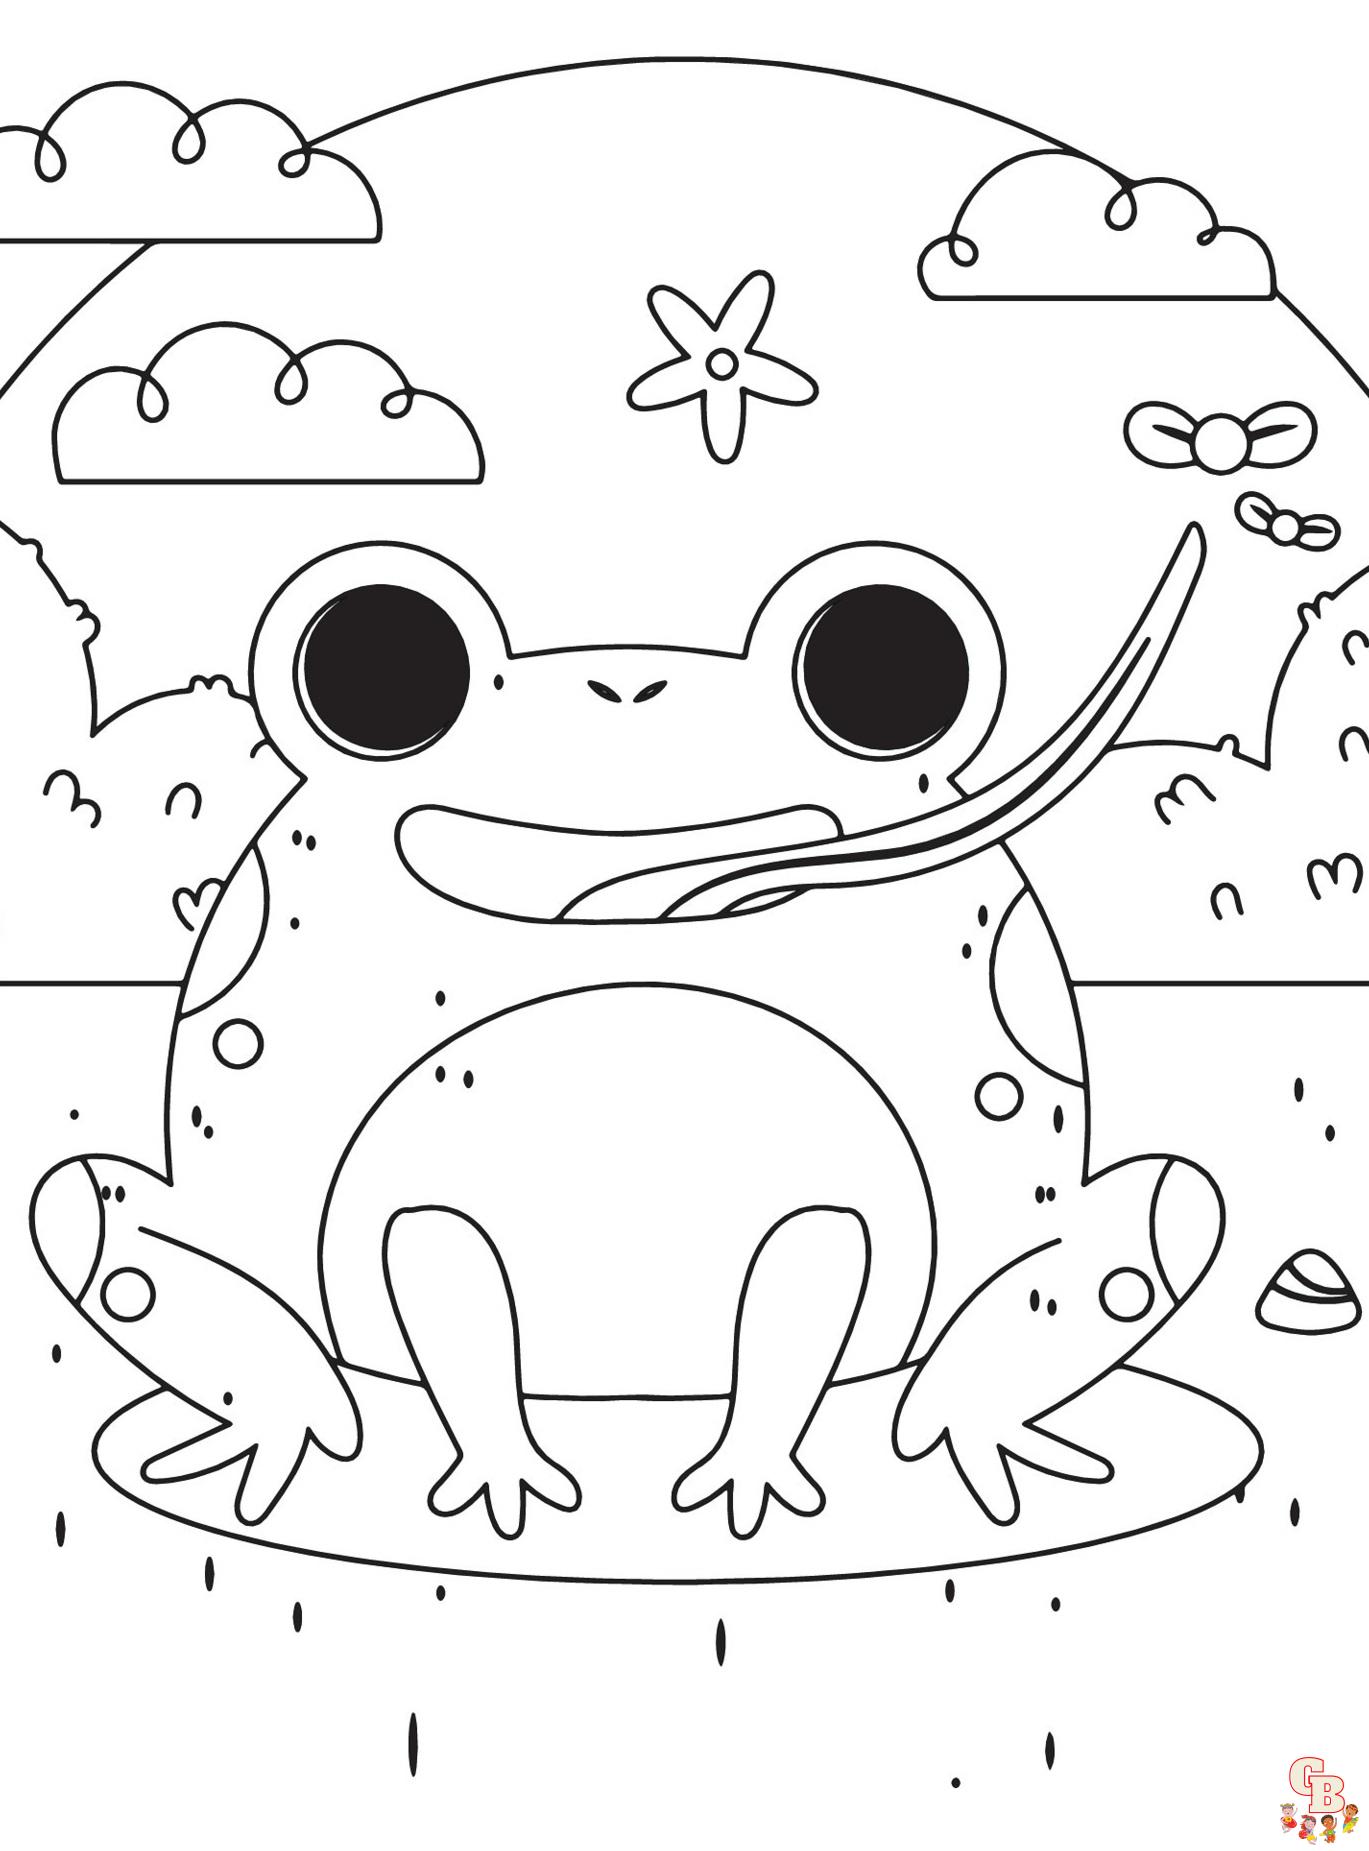 Cute Frog Coloring Pages: Δωρεάν εκτυπώσιμες σελίδες για παιδιά